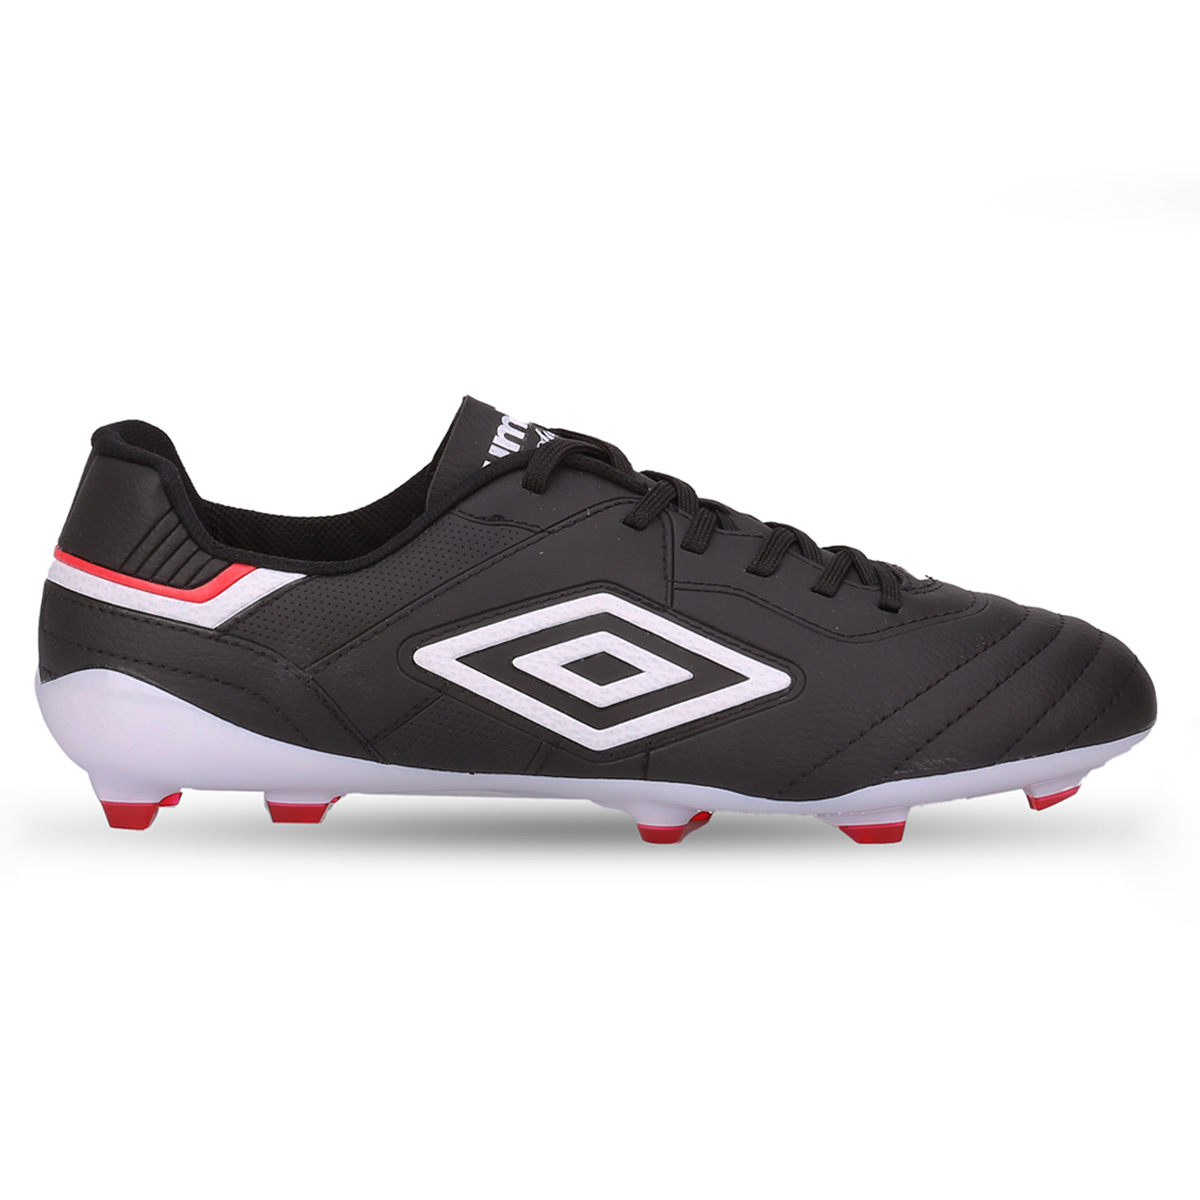 Botines Umbro Campo Speciali III League,  image number null